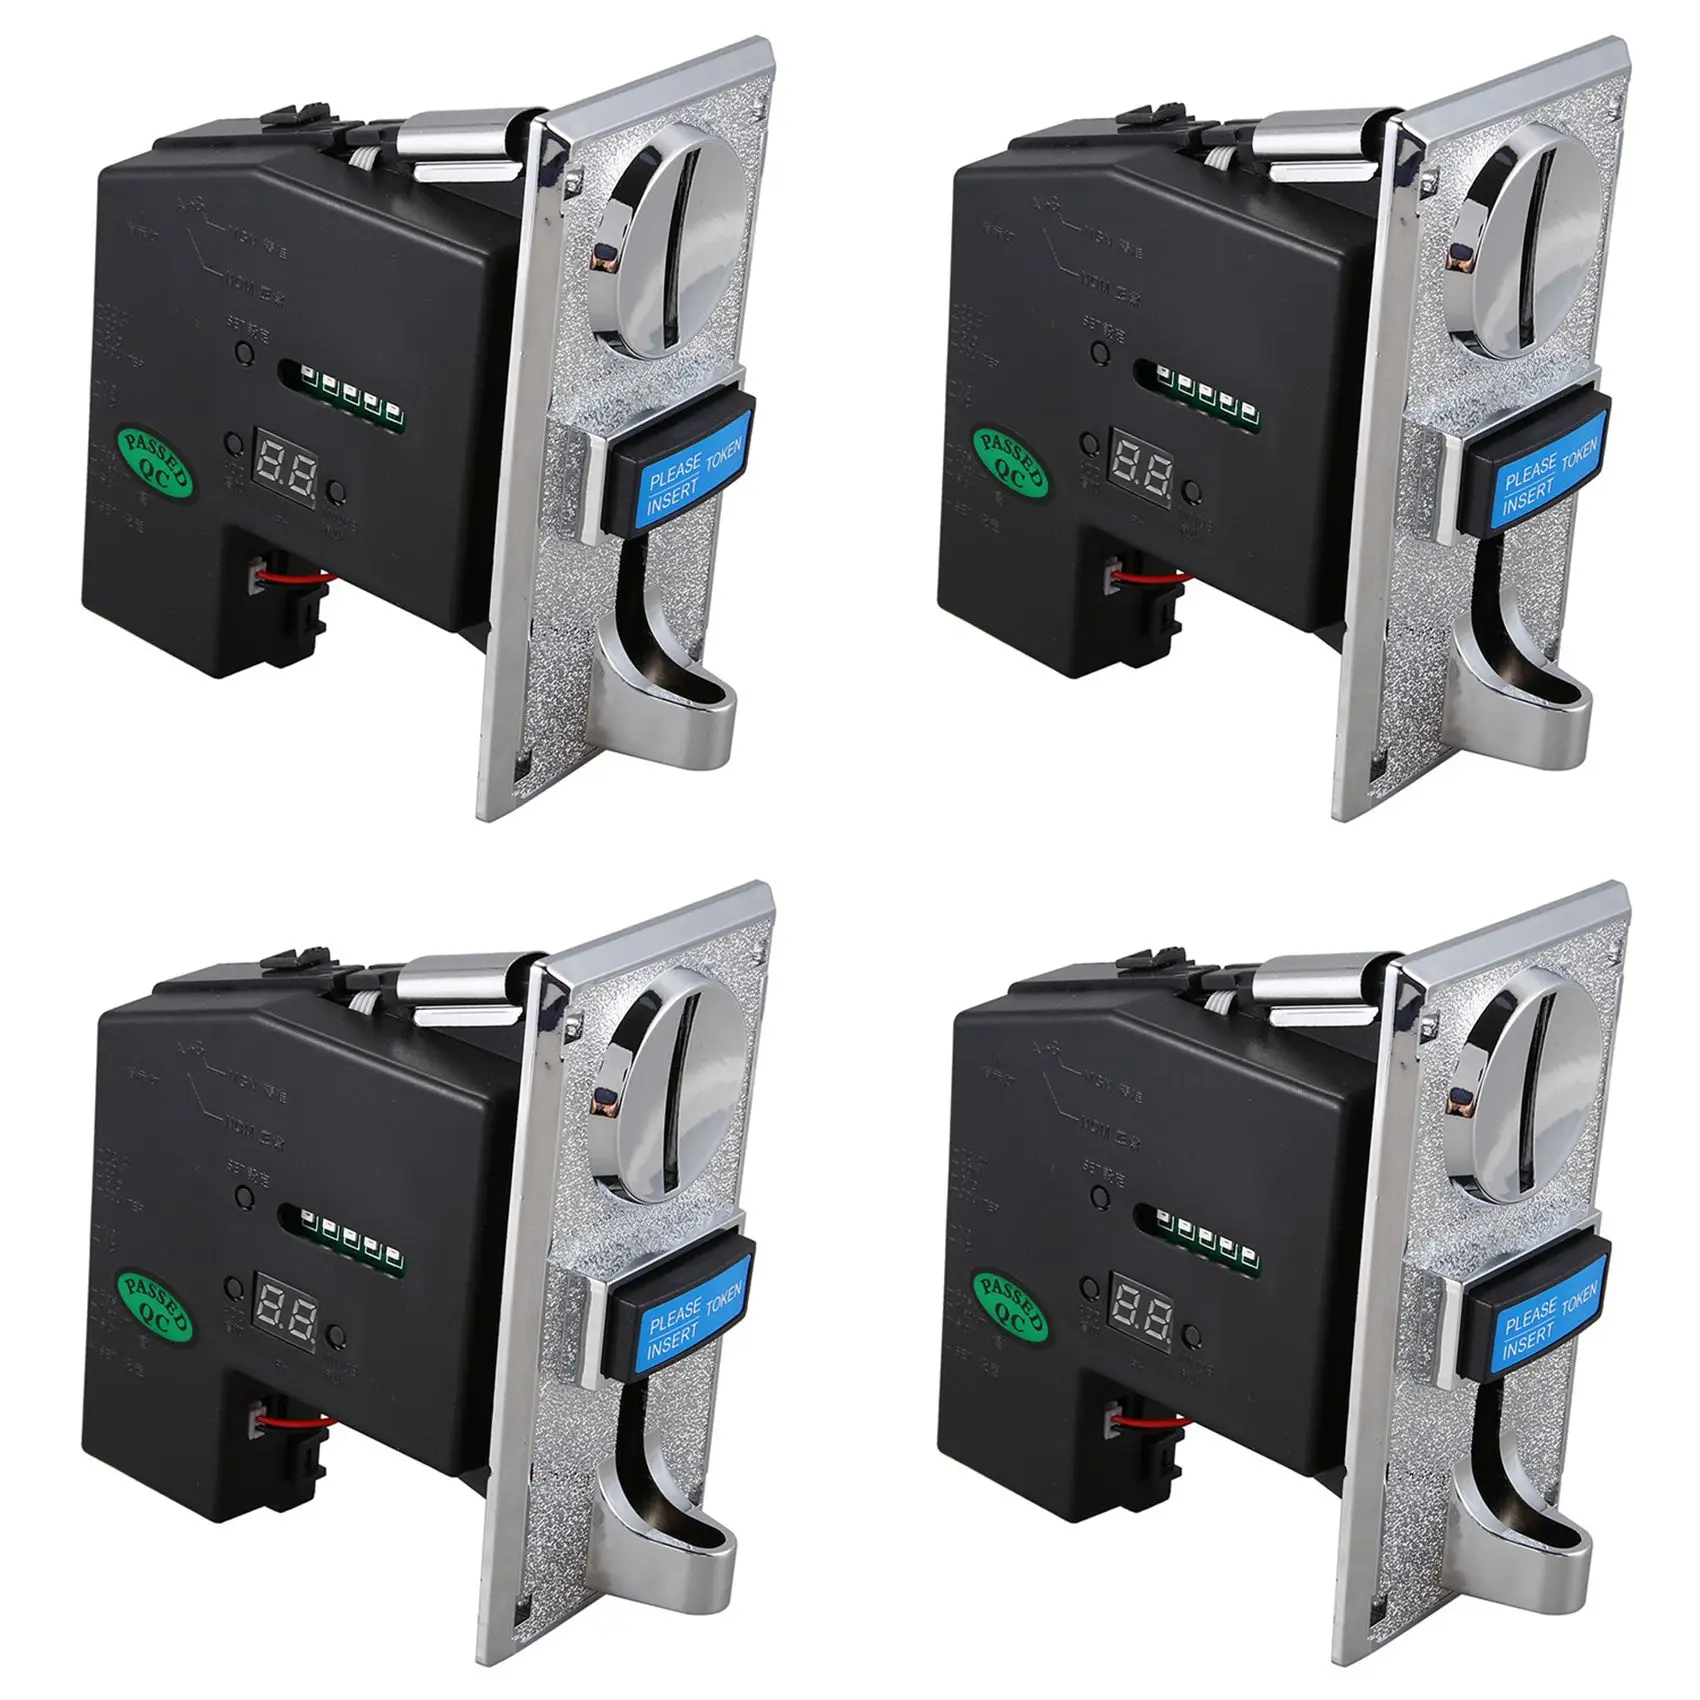 

4X Multi Coin Acceptor Selector For Mechanism Vending Machine Mech Arcade Game